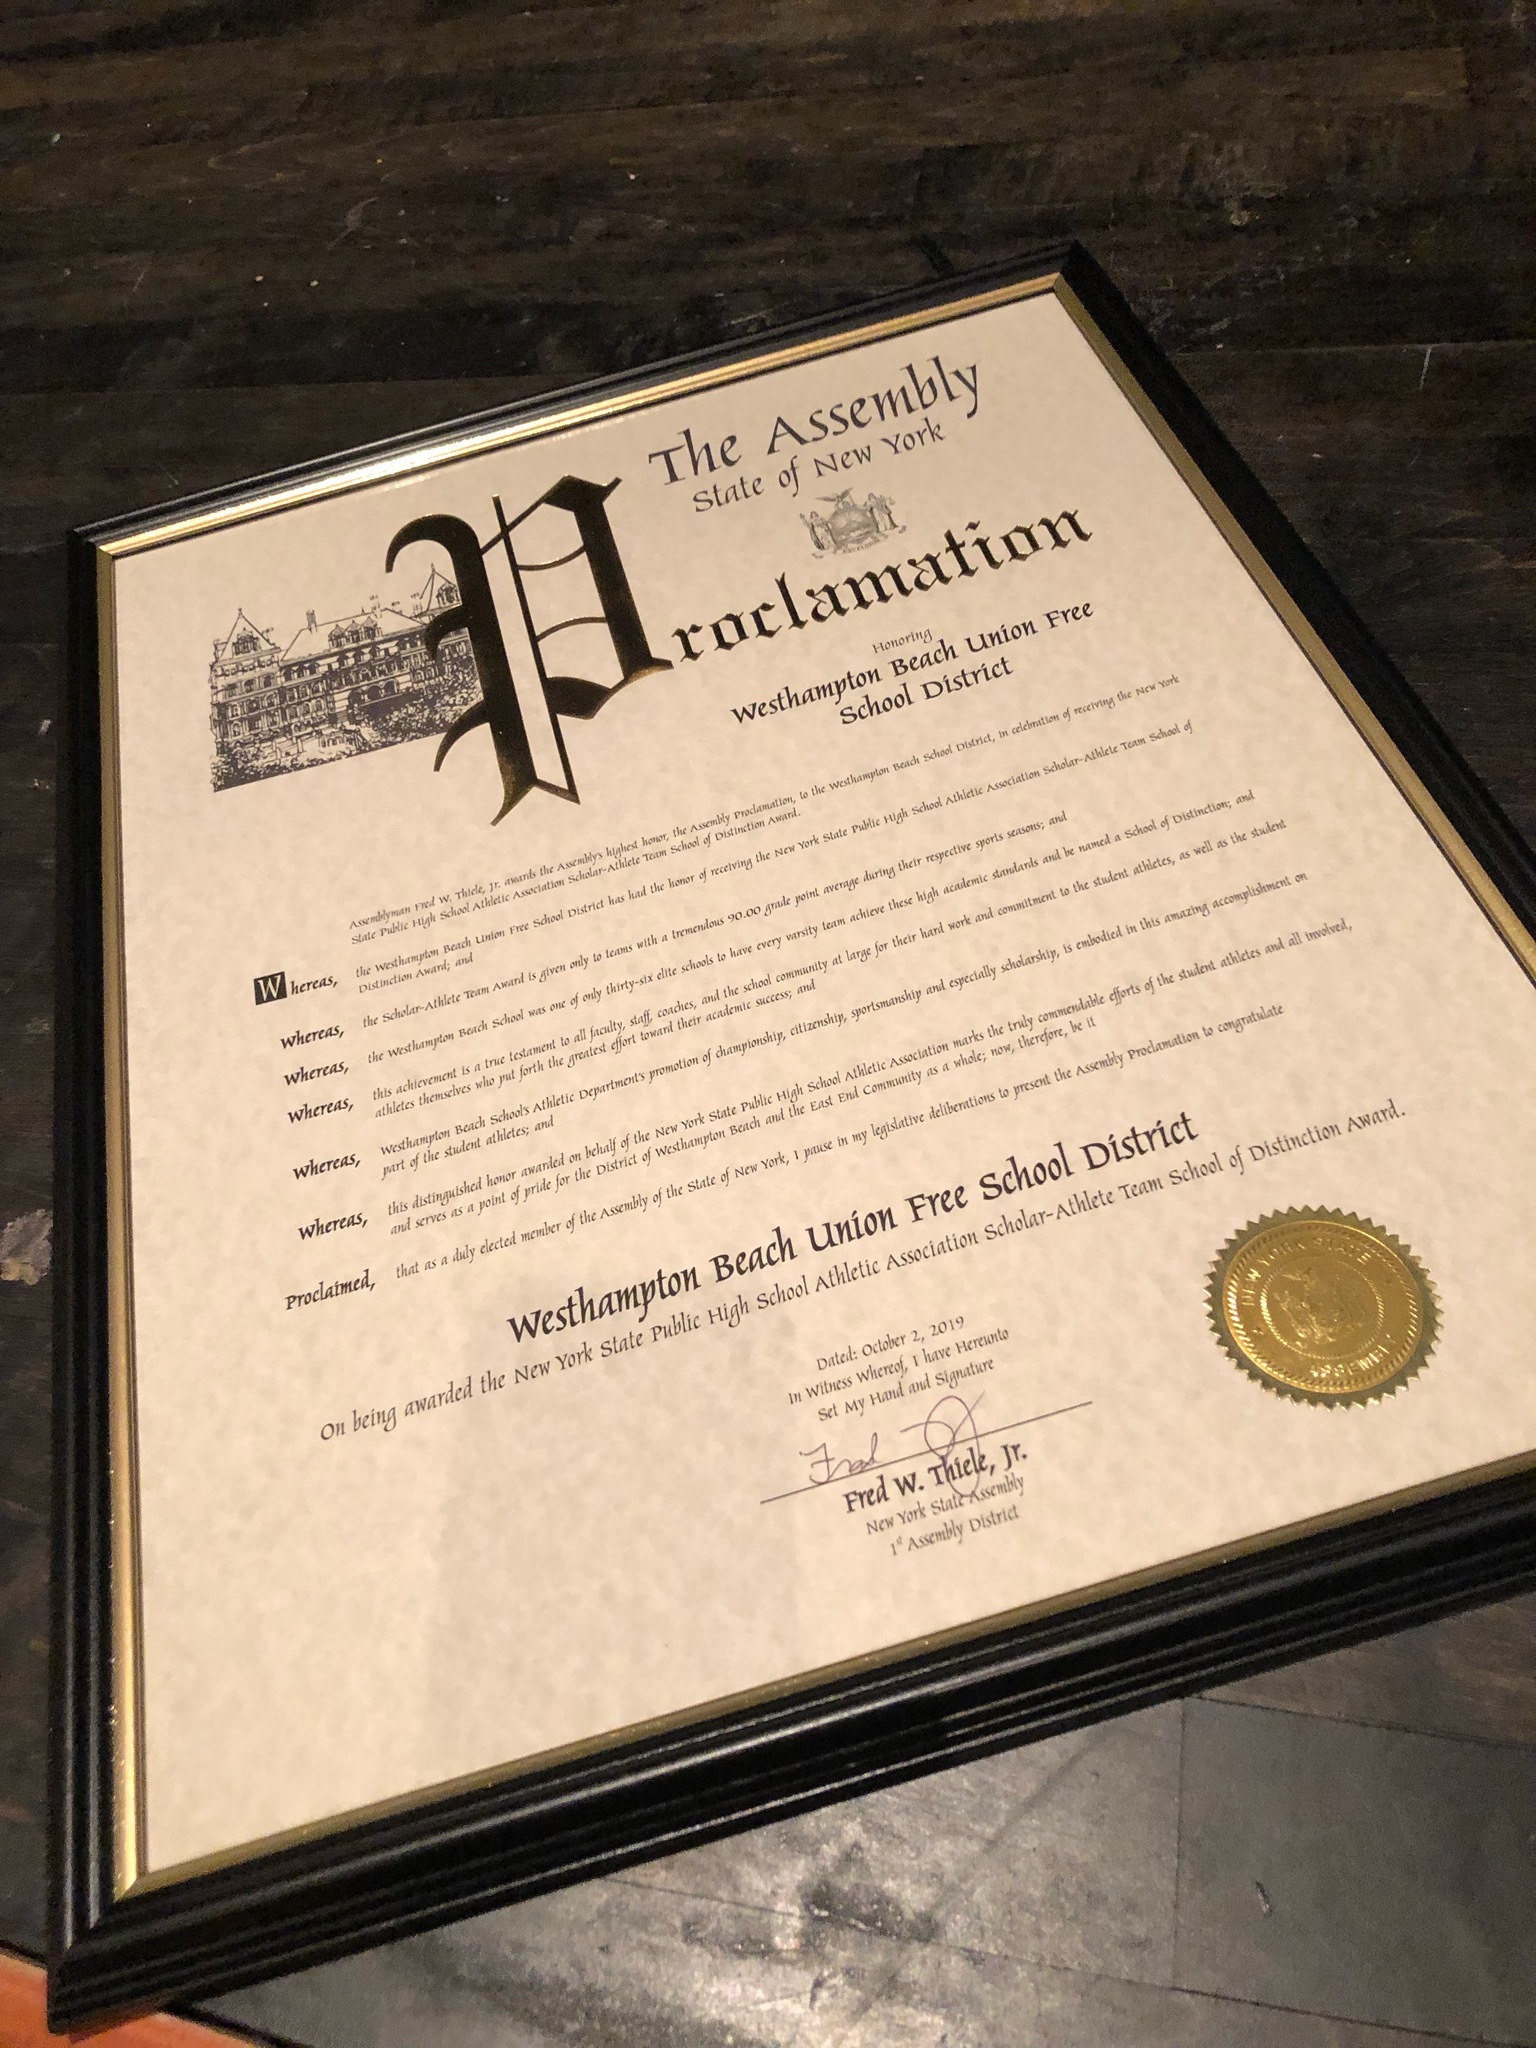 Proclamation signed by State Assemblyman Fred Thiele.